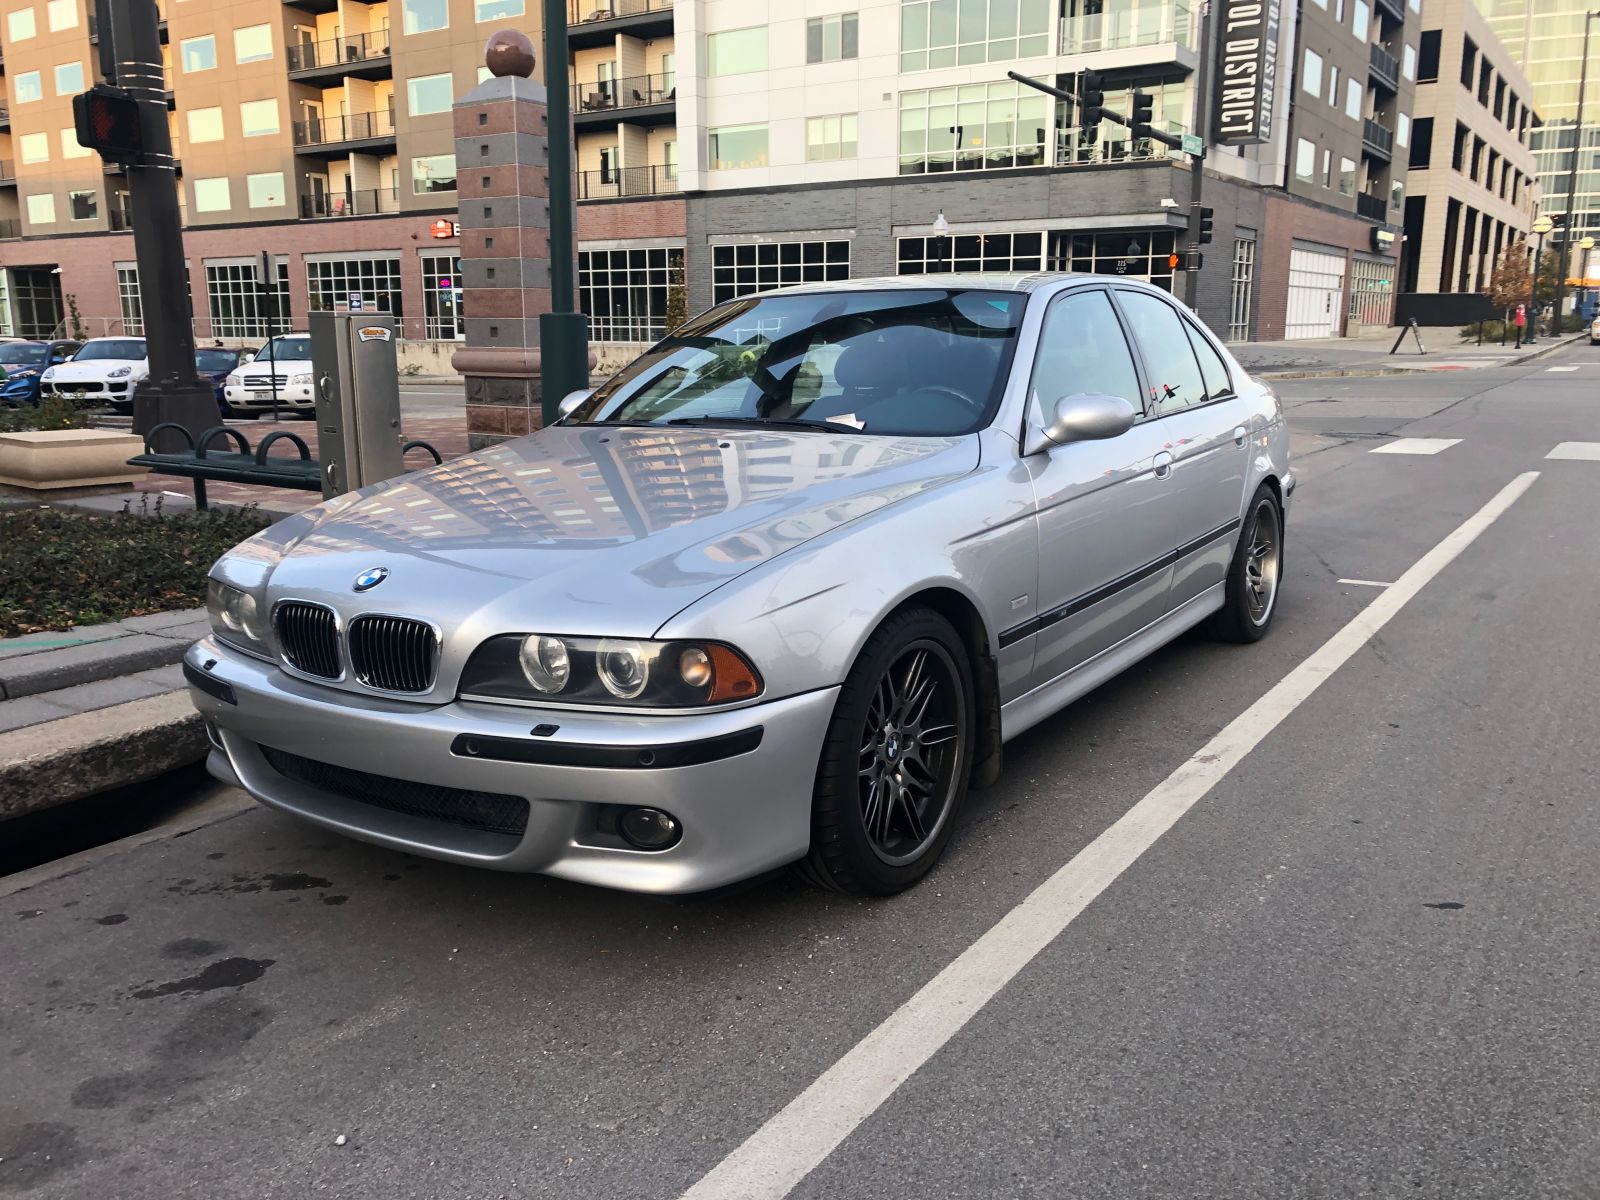 Illustration for article titled Clean E39 M5 with a parking ticket